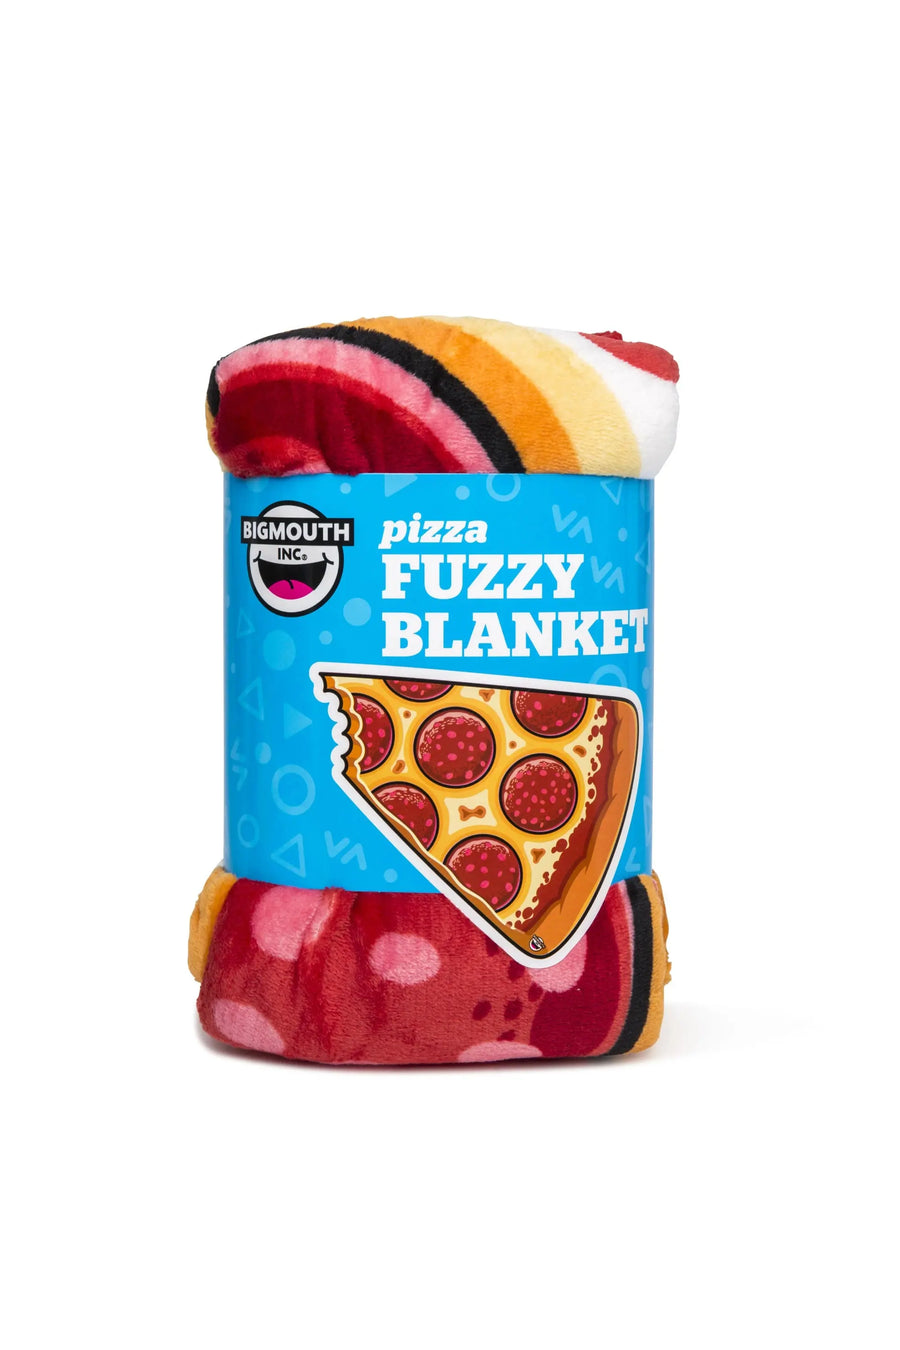 Pizza Throw Blanket Big Mouth